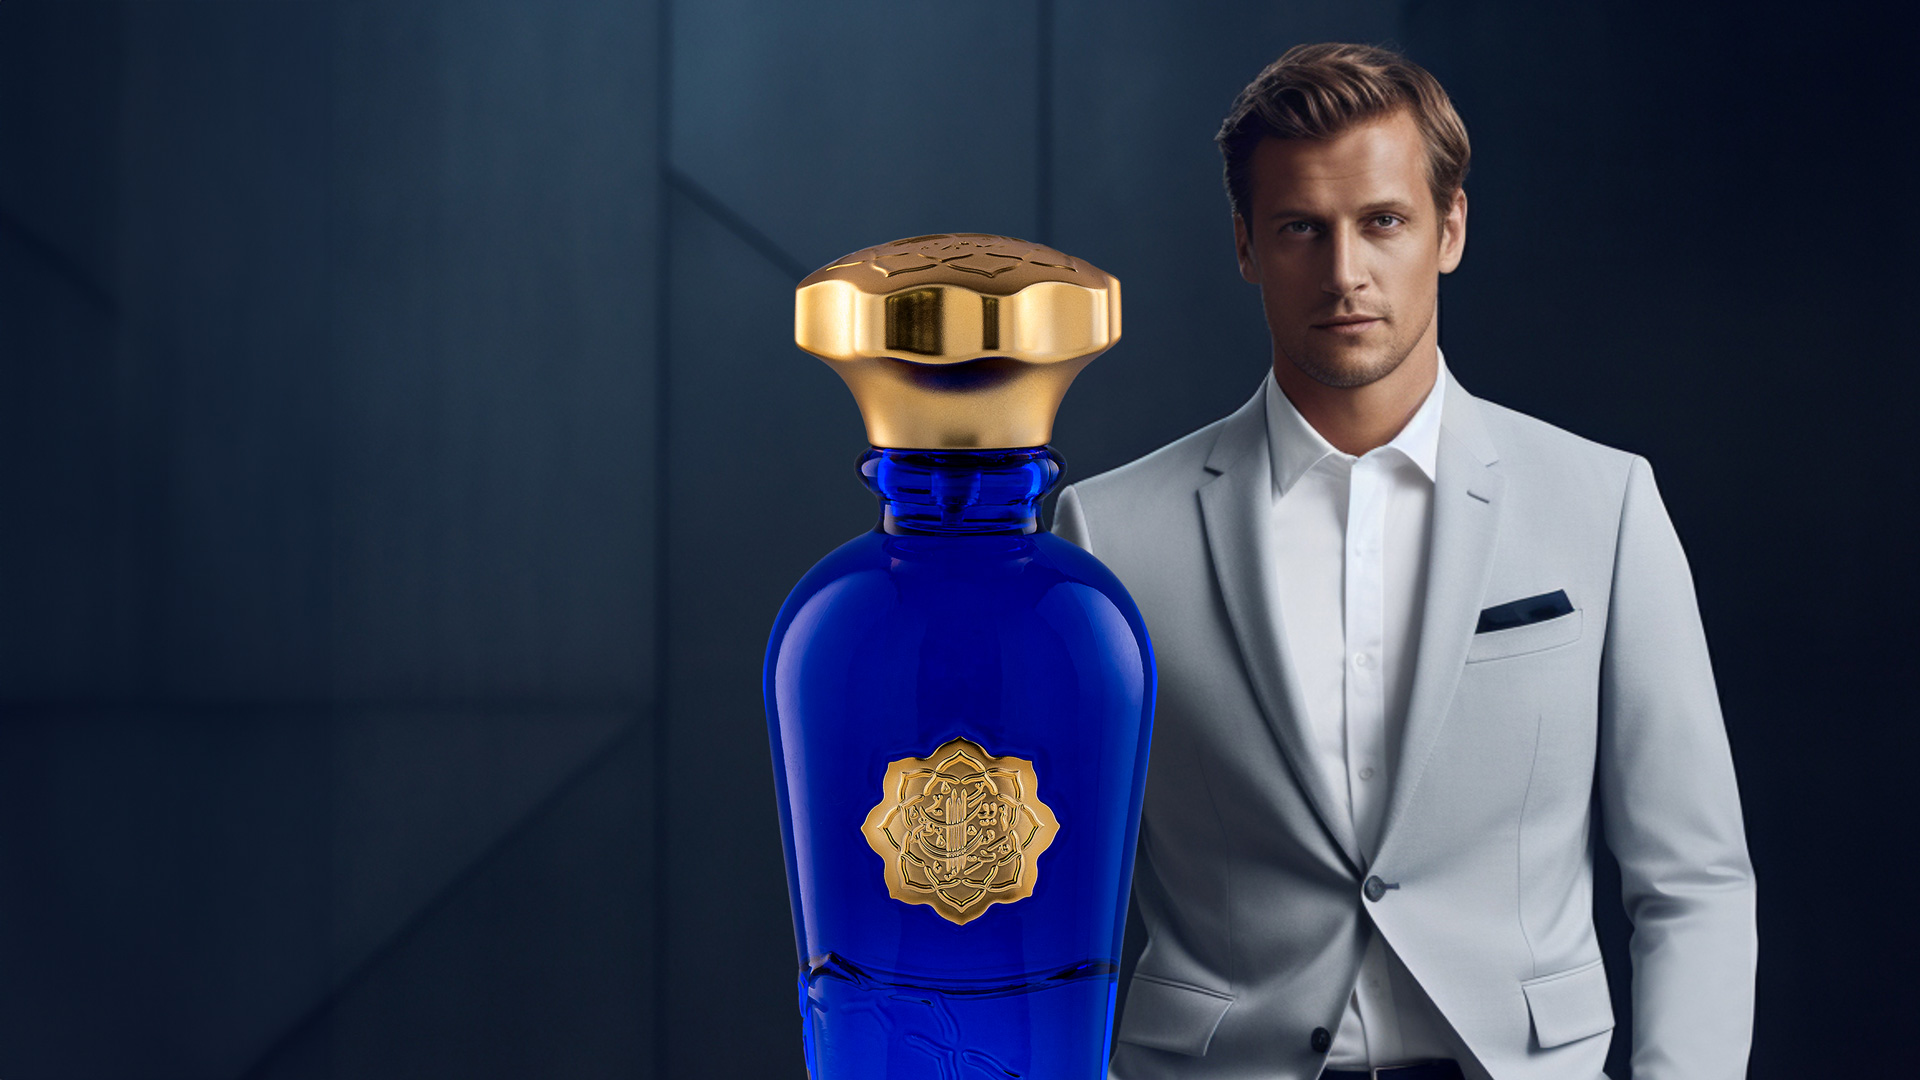 Get That Wow Factor & Stand Out from the Crowd: Affordable Branded Copy Perfumes for Men